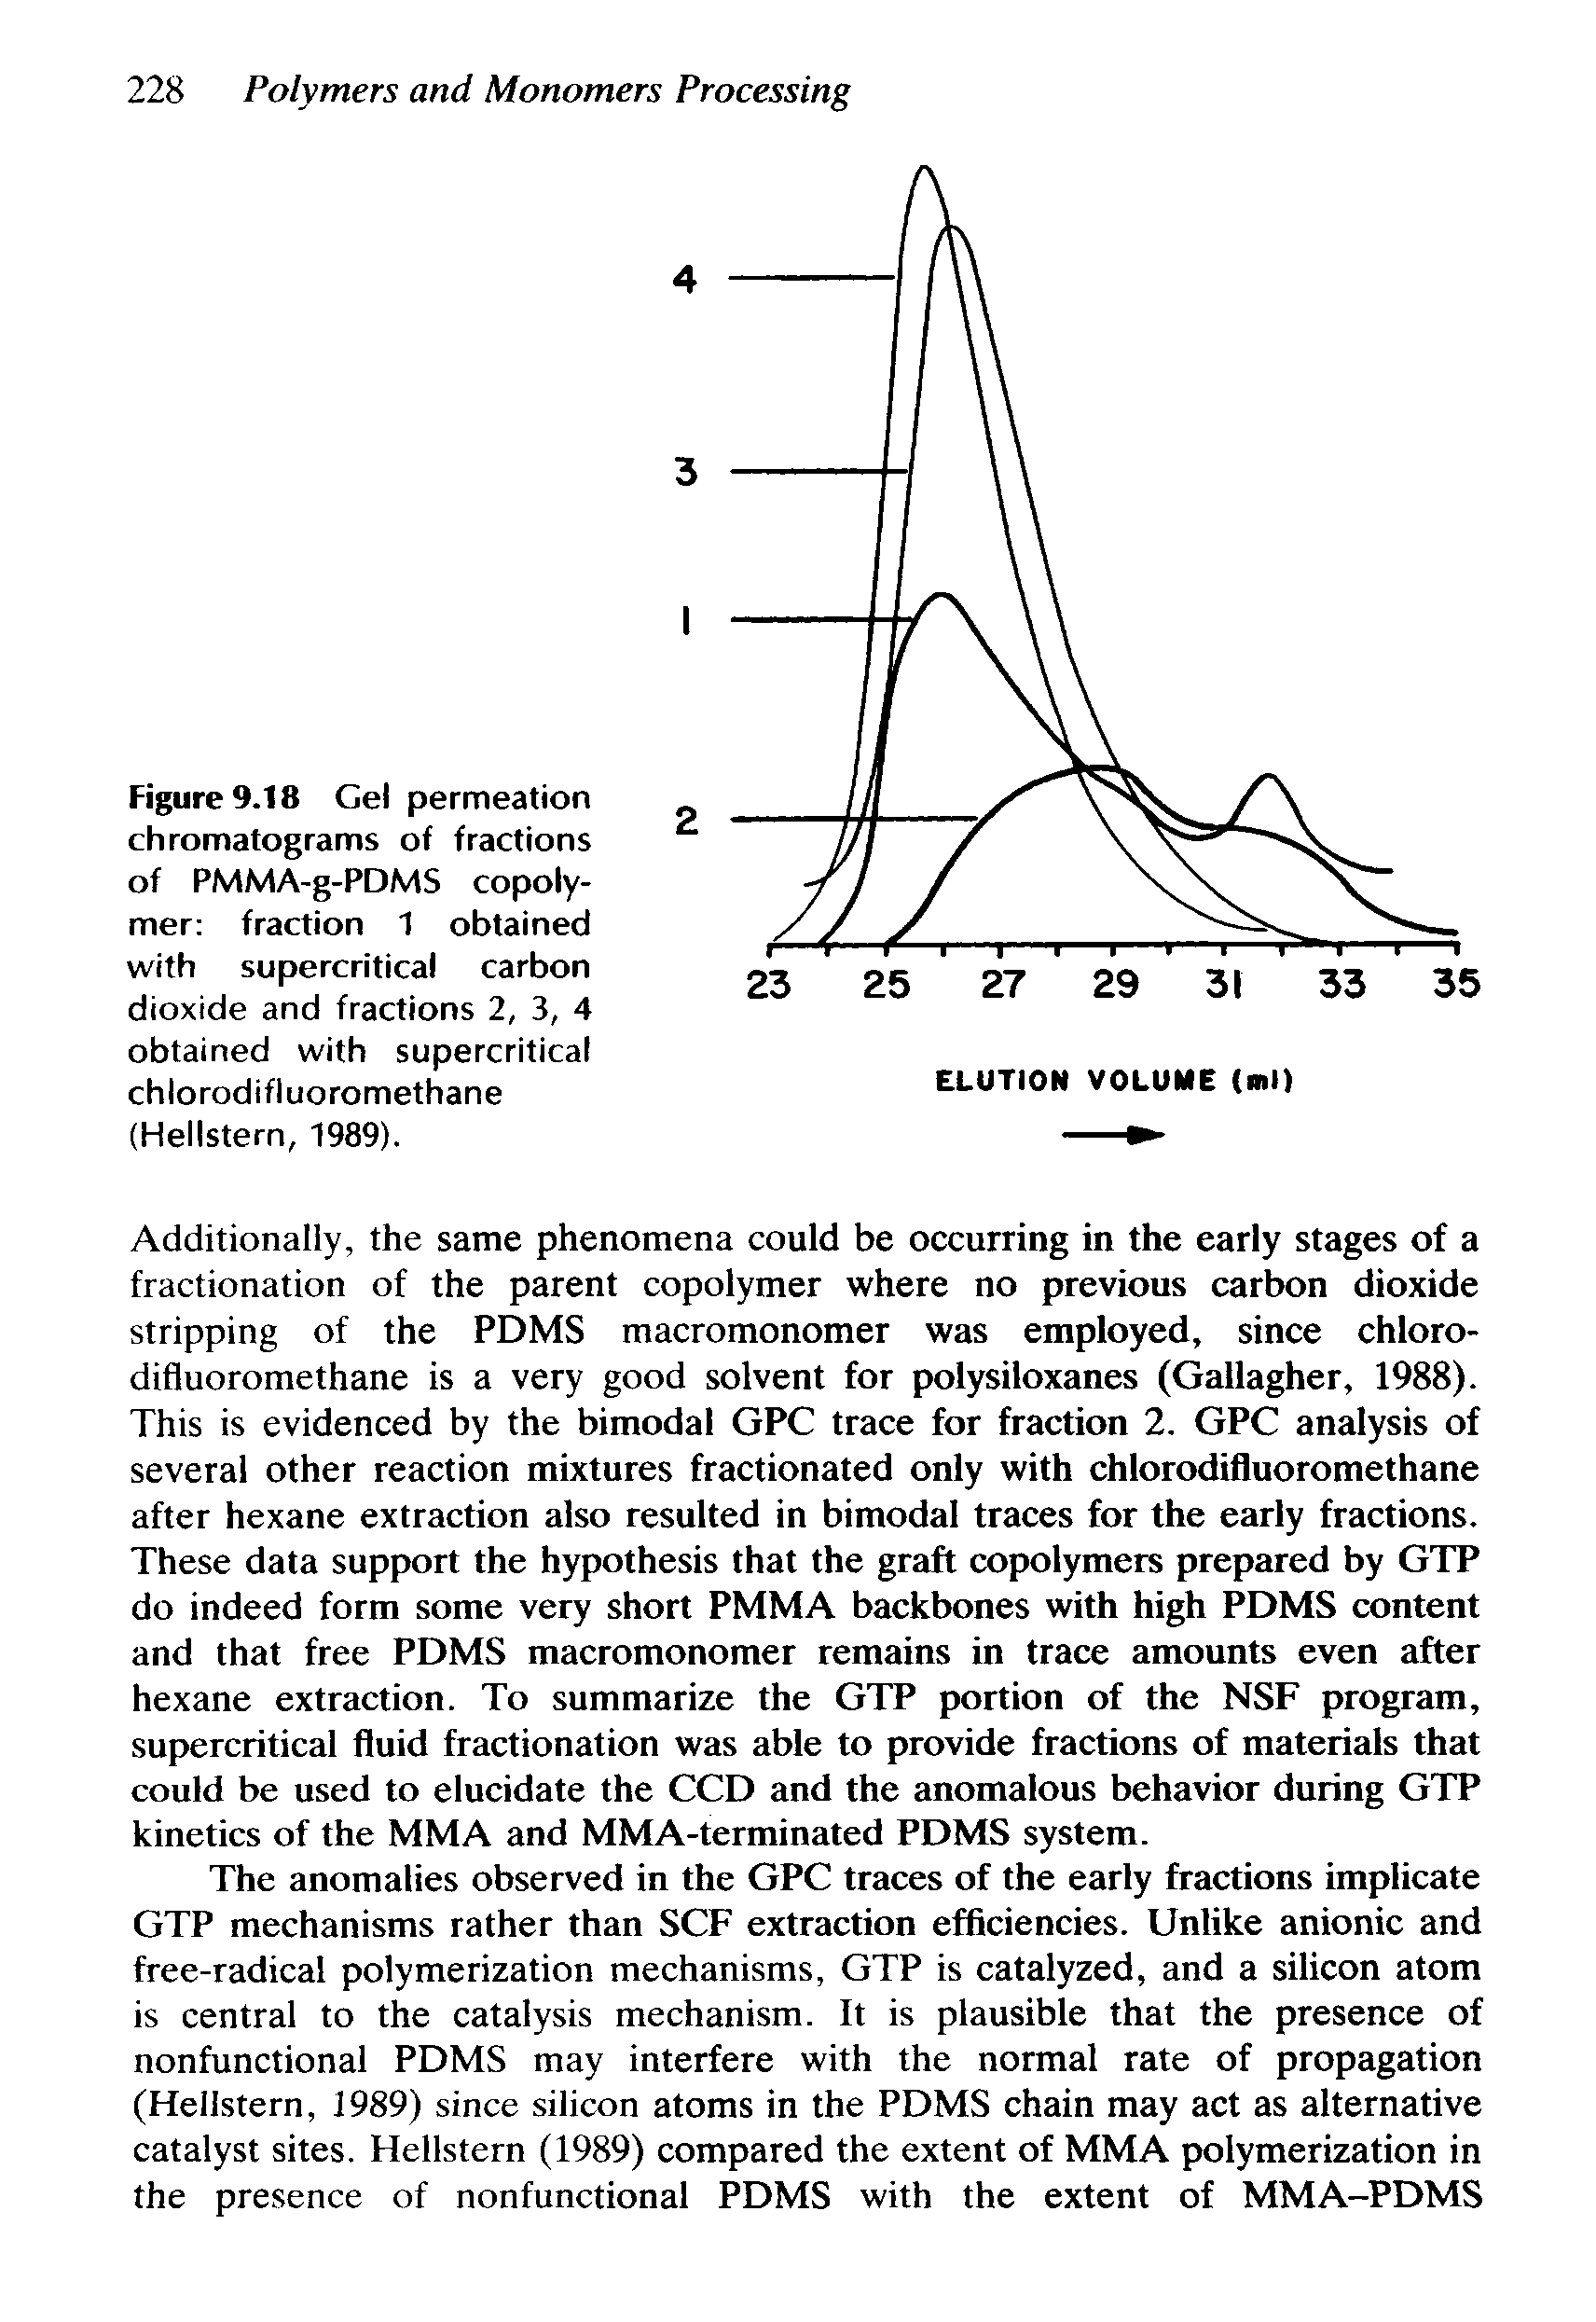 Figure 9.18 Gel permeation chromatograms of fractions of PMMA-g-PDMS copolymer fraction 1 obtained with supercritical carbon dioxide and fractions 2, 3, 4 obtained with supercritical chlorodifluoromethane (Hellstern, 1989).